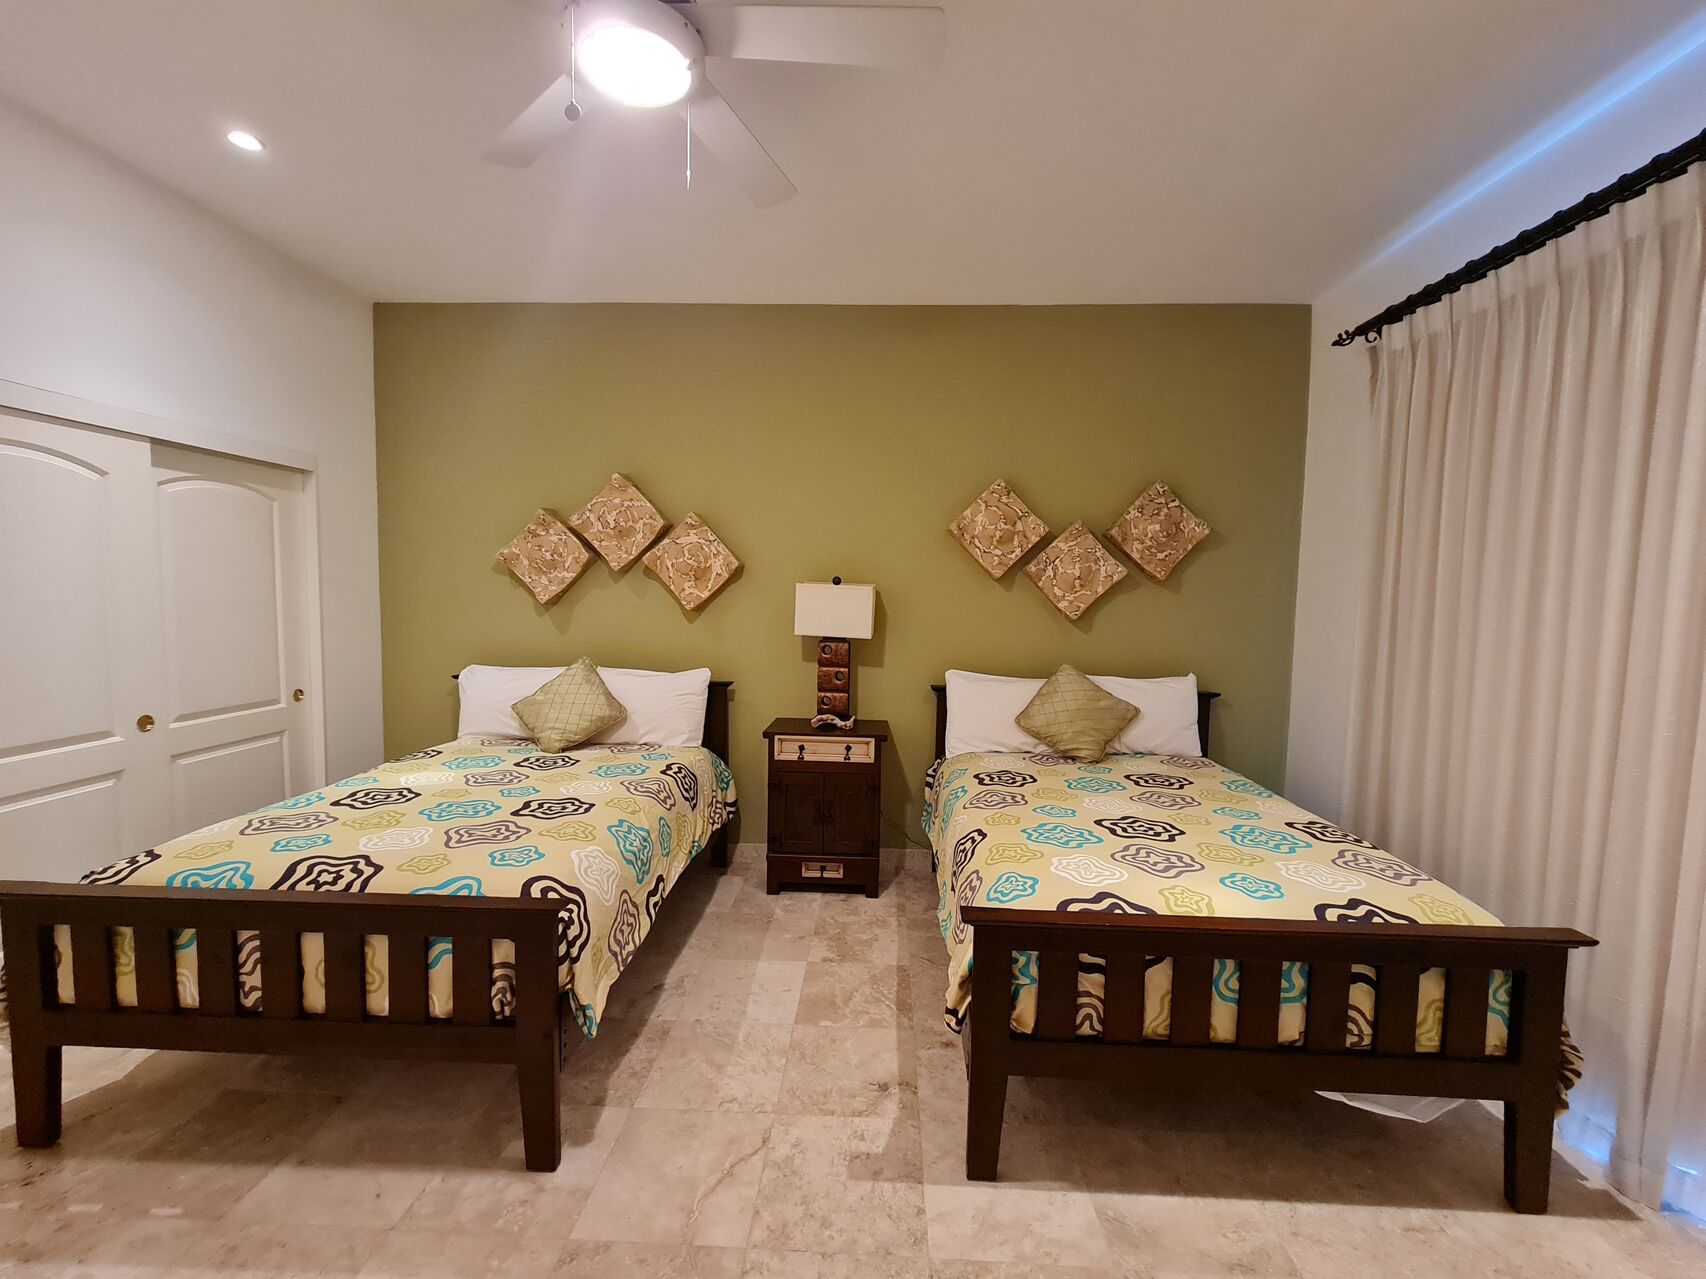 Guest bedrooms full size beds